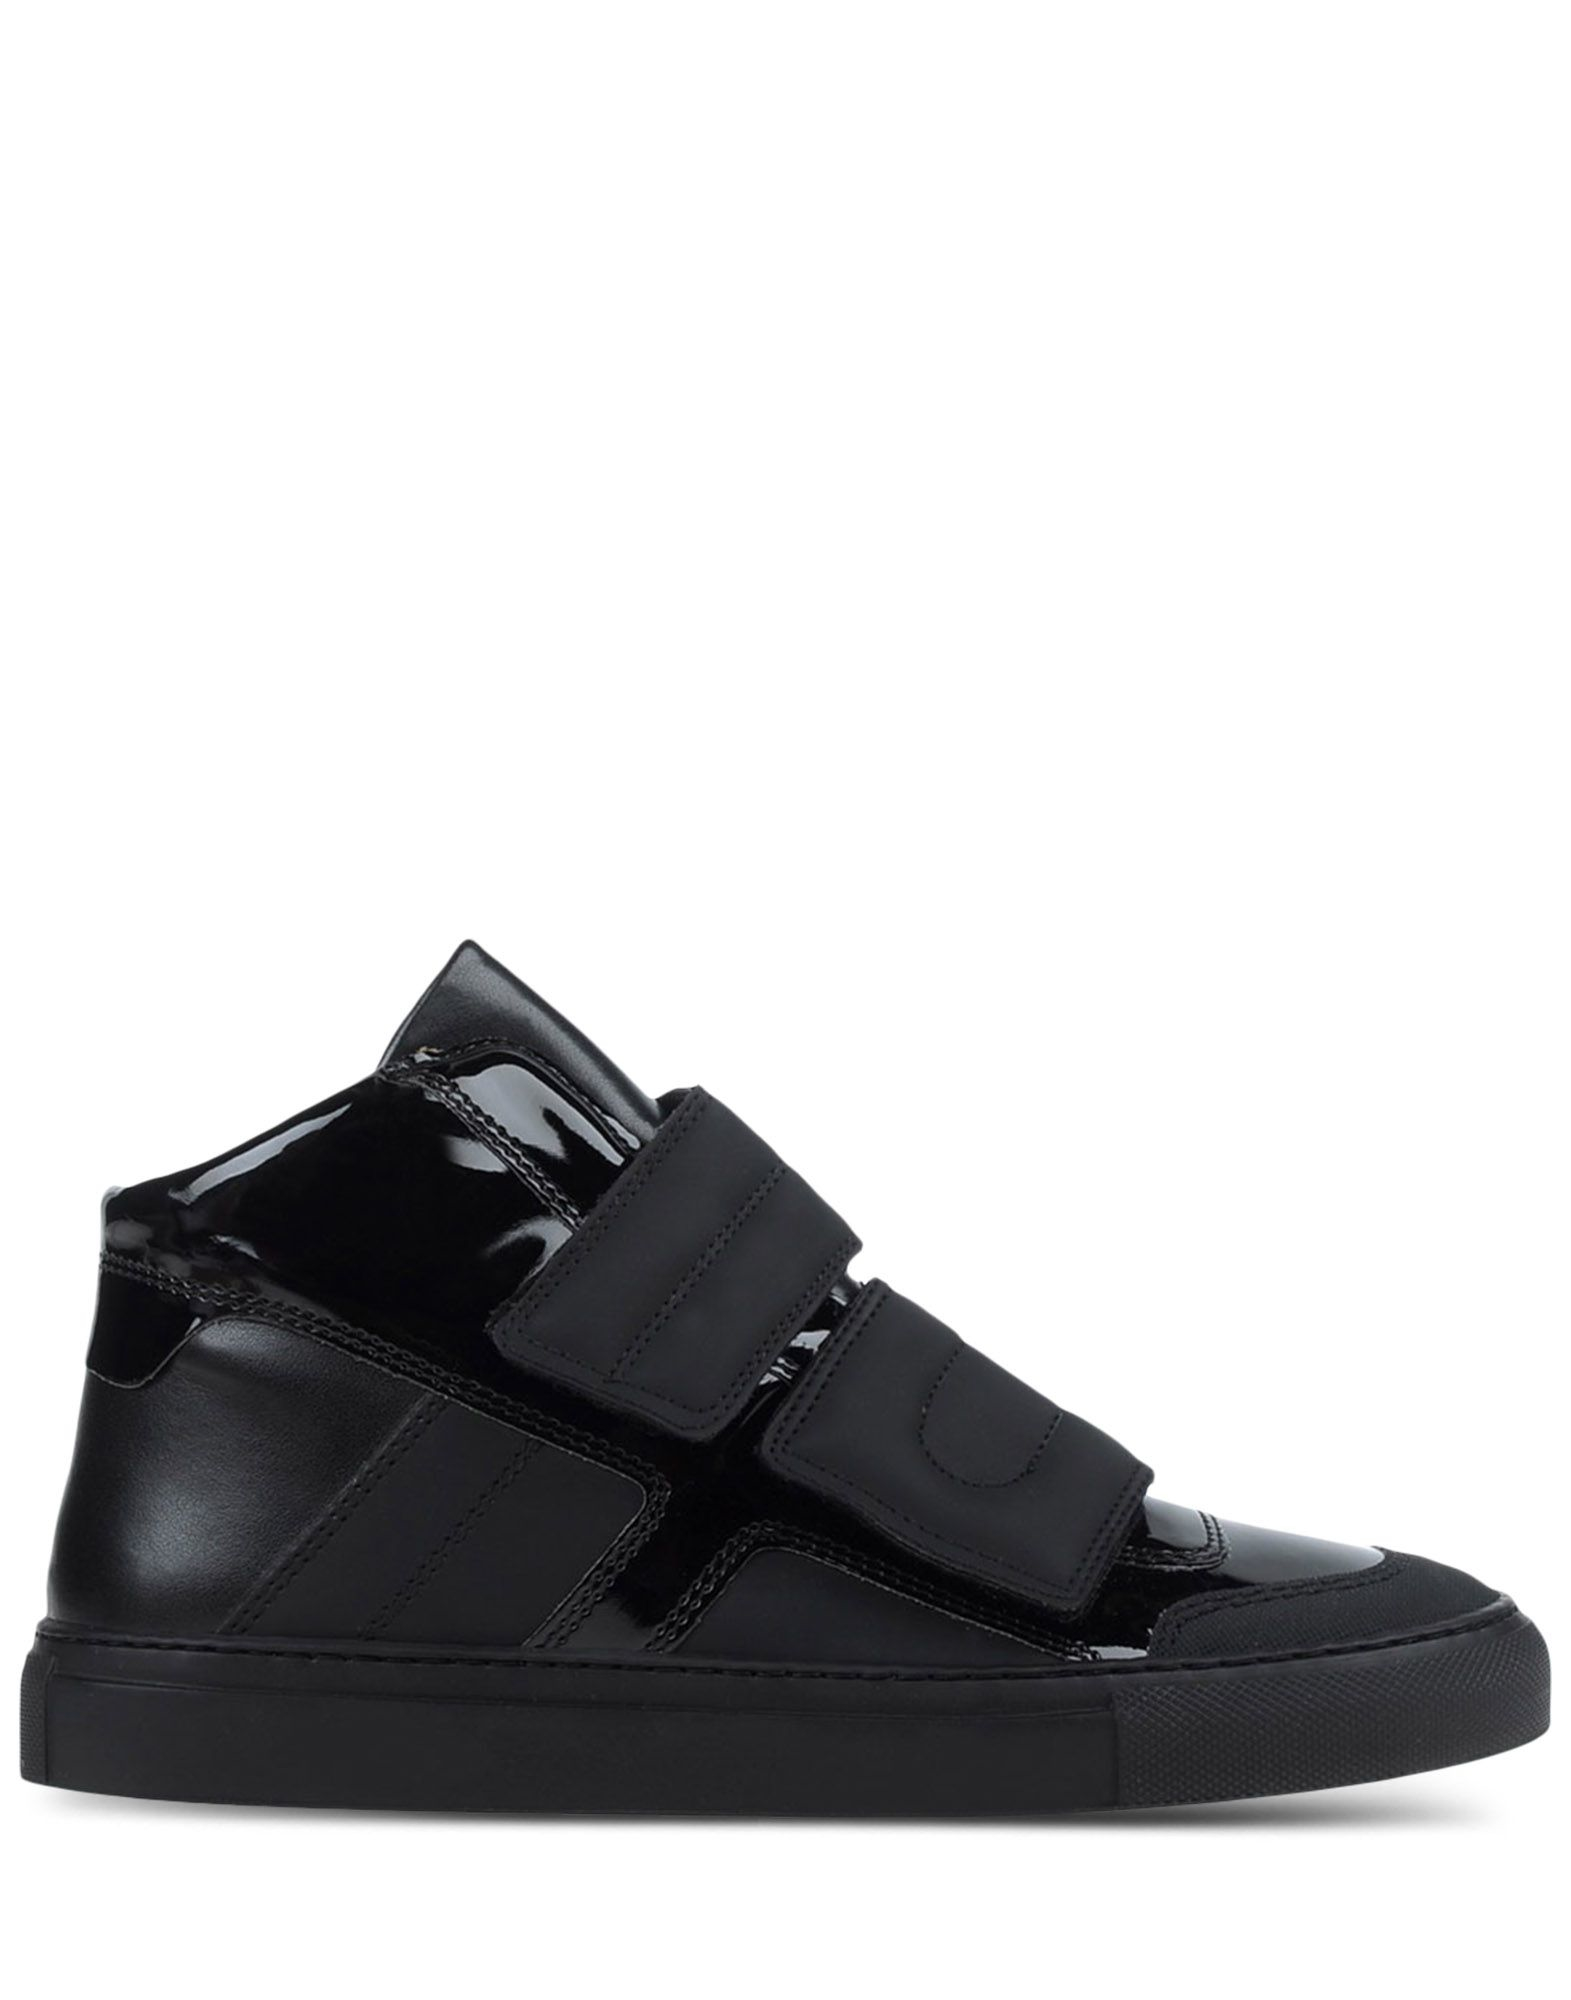 MM6 by Maison Martin Margiela | Black Leather Mid-Top Sneakers | Lyst